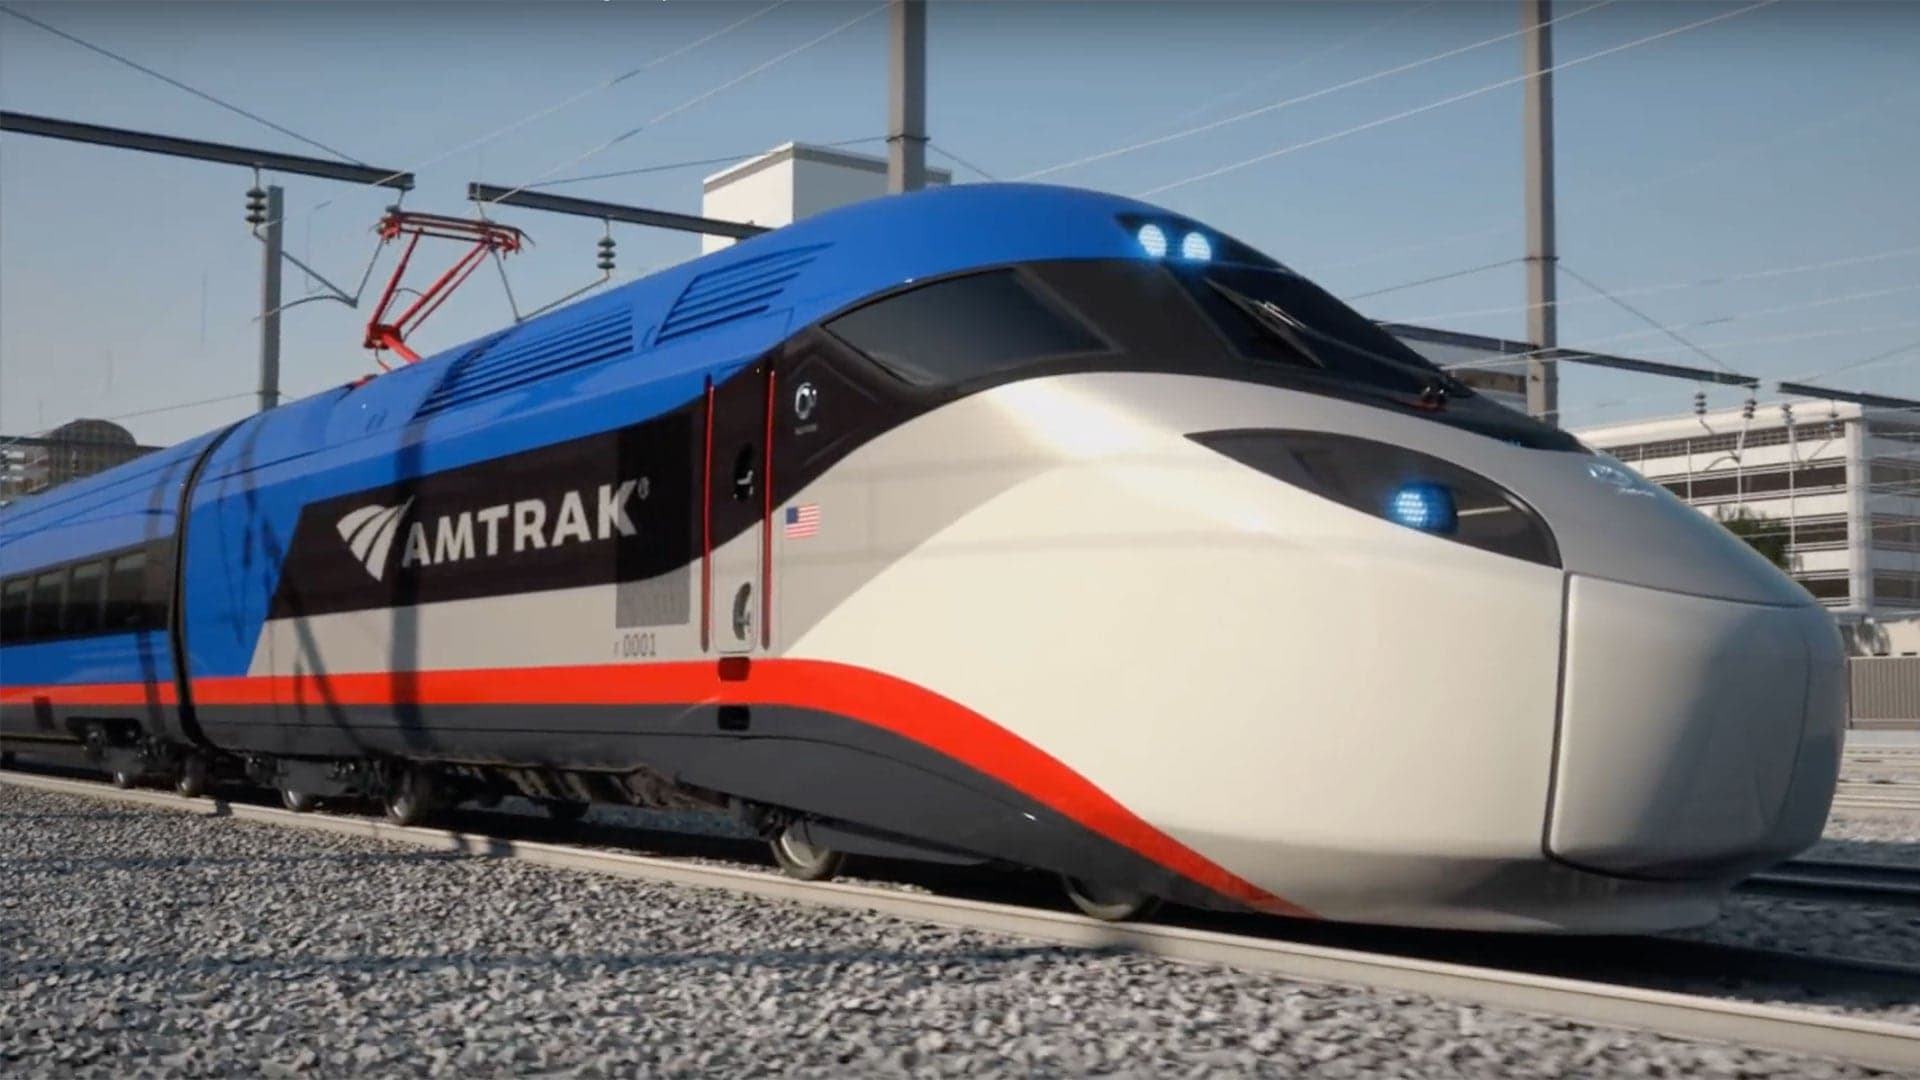 Amtrak’s New 186 MPH Bullet Trains Will Be Here in 2021